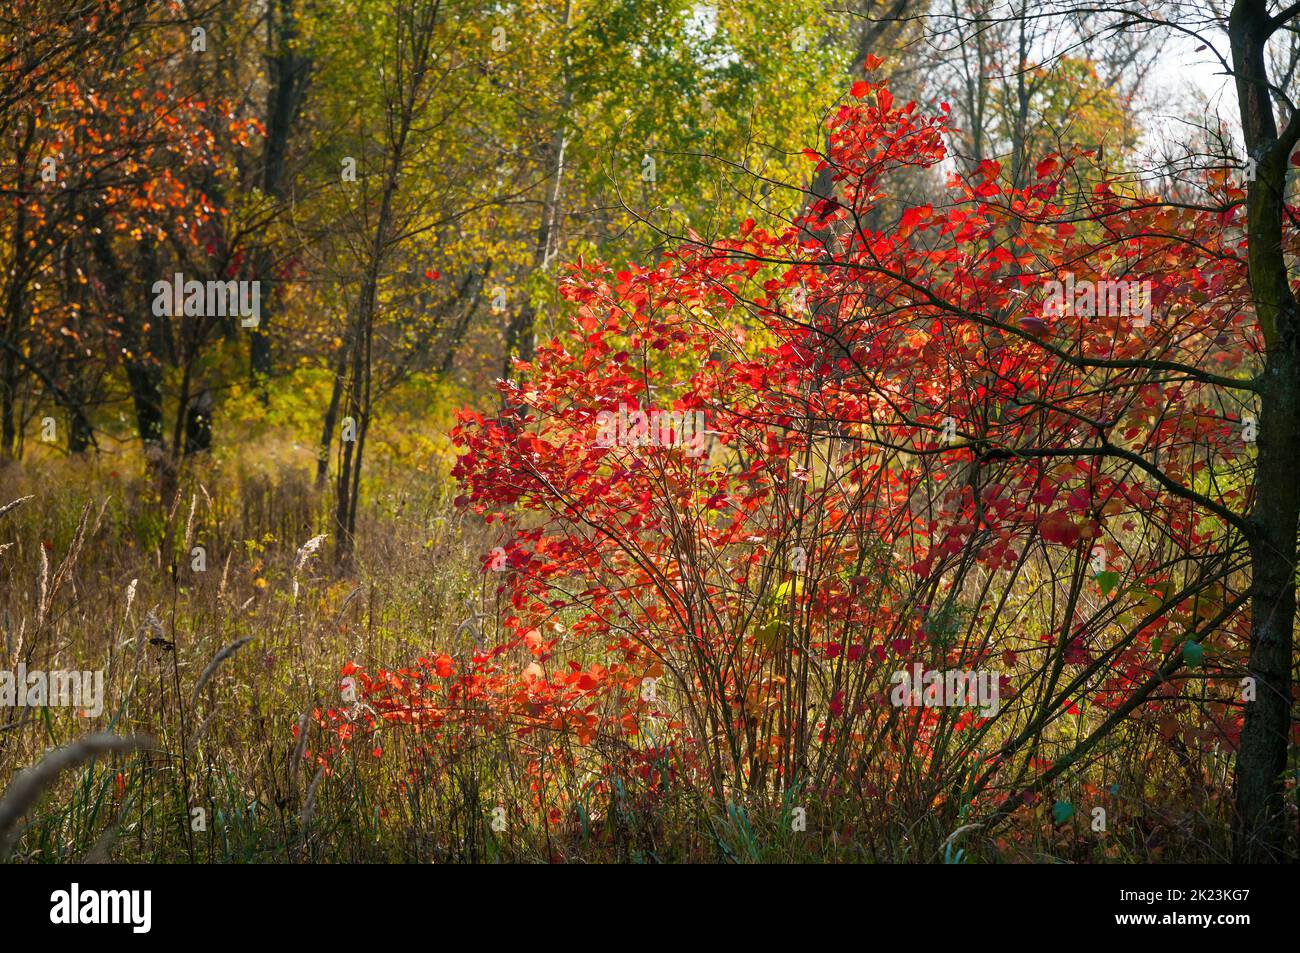 Autumn trees with colored leaves in the forest in autumn Stock Photo